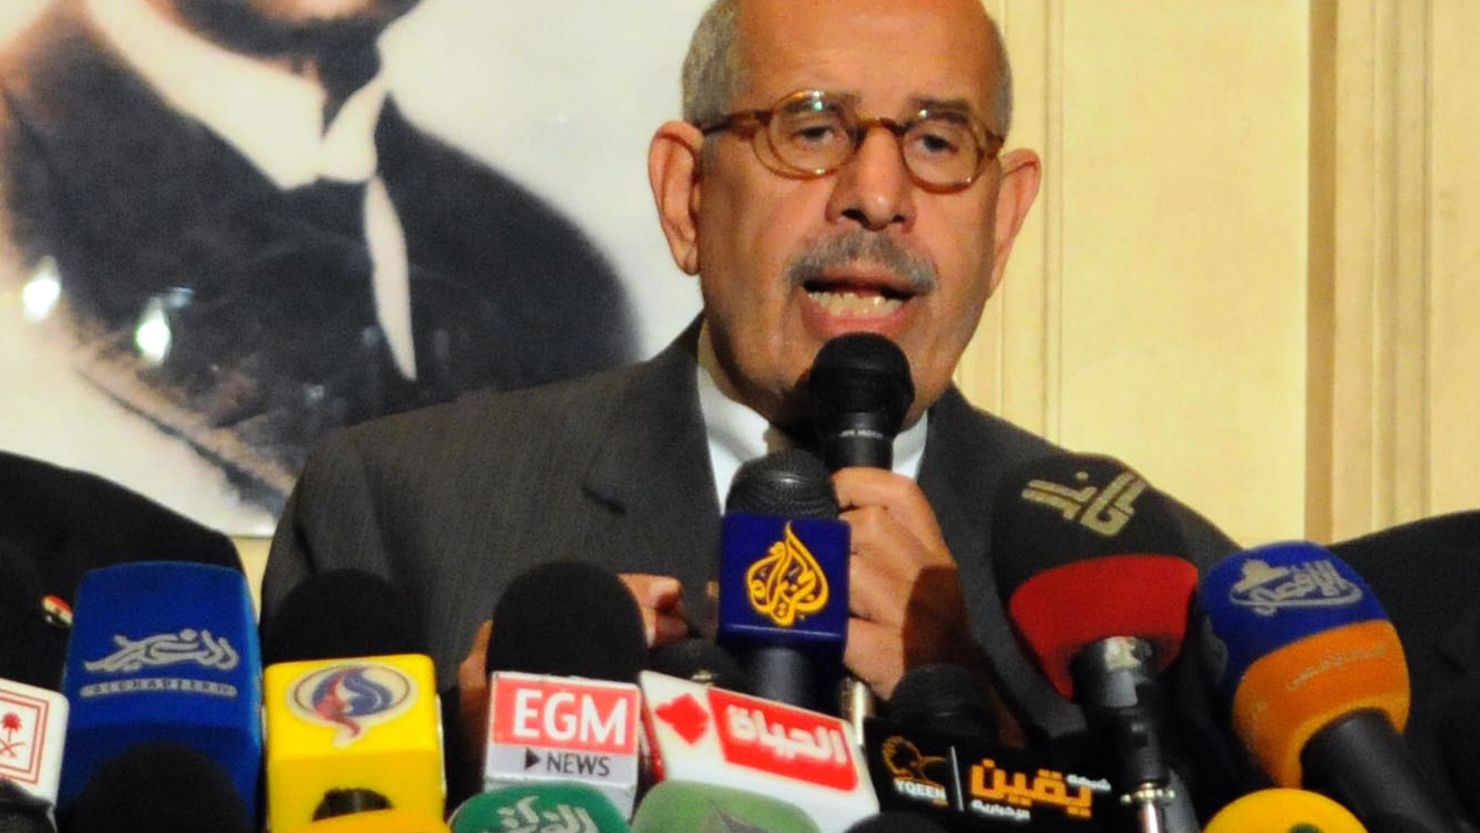 Egyptian opposition leader Mohamed ElBaradei is pictured at a press conference in Cairo on January 28.